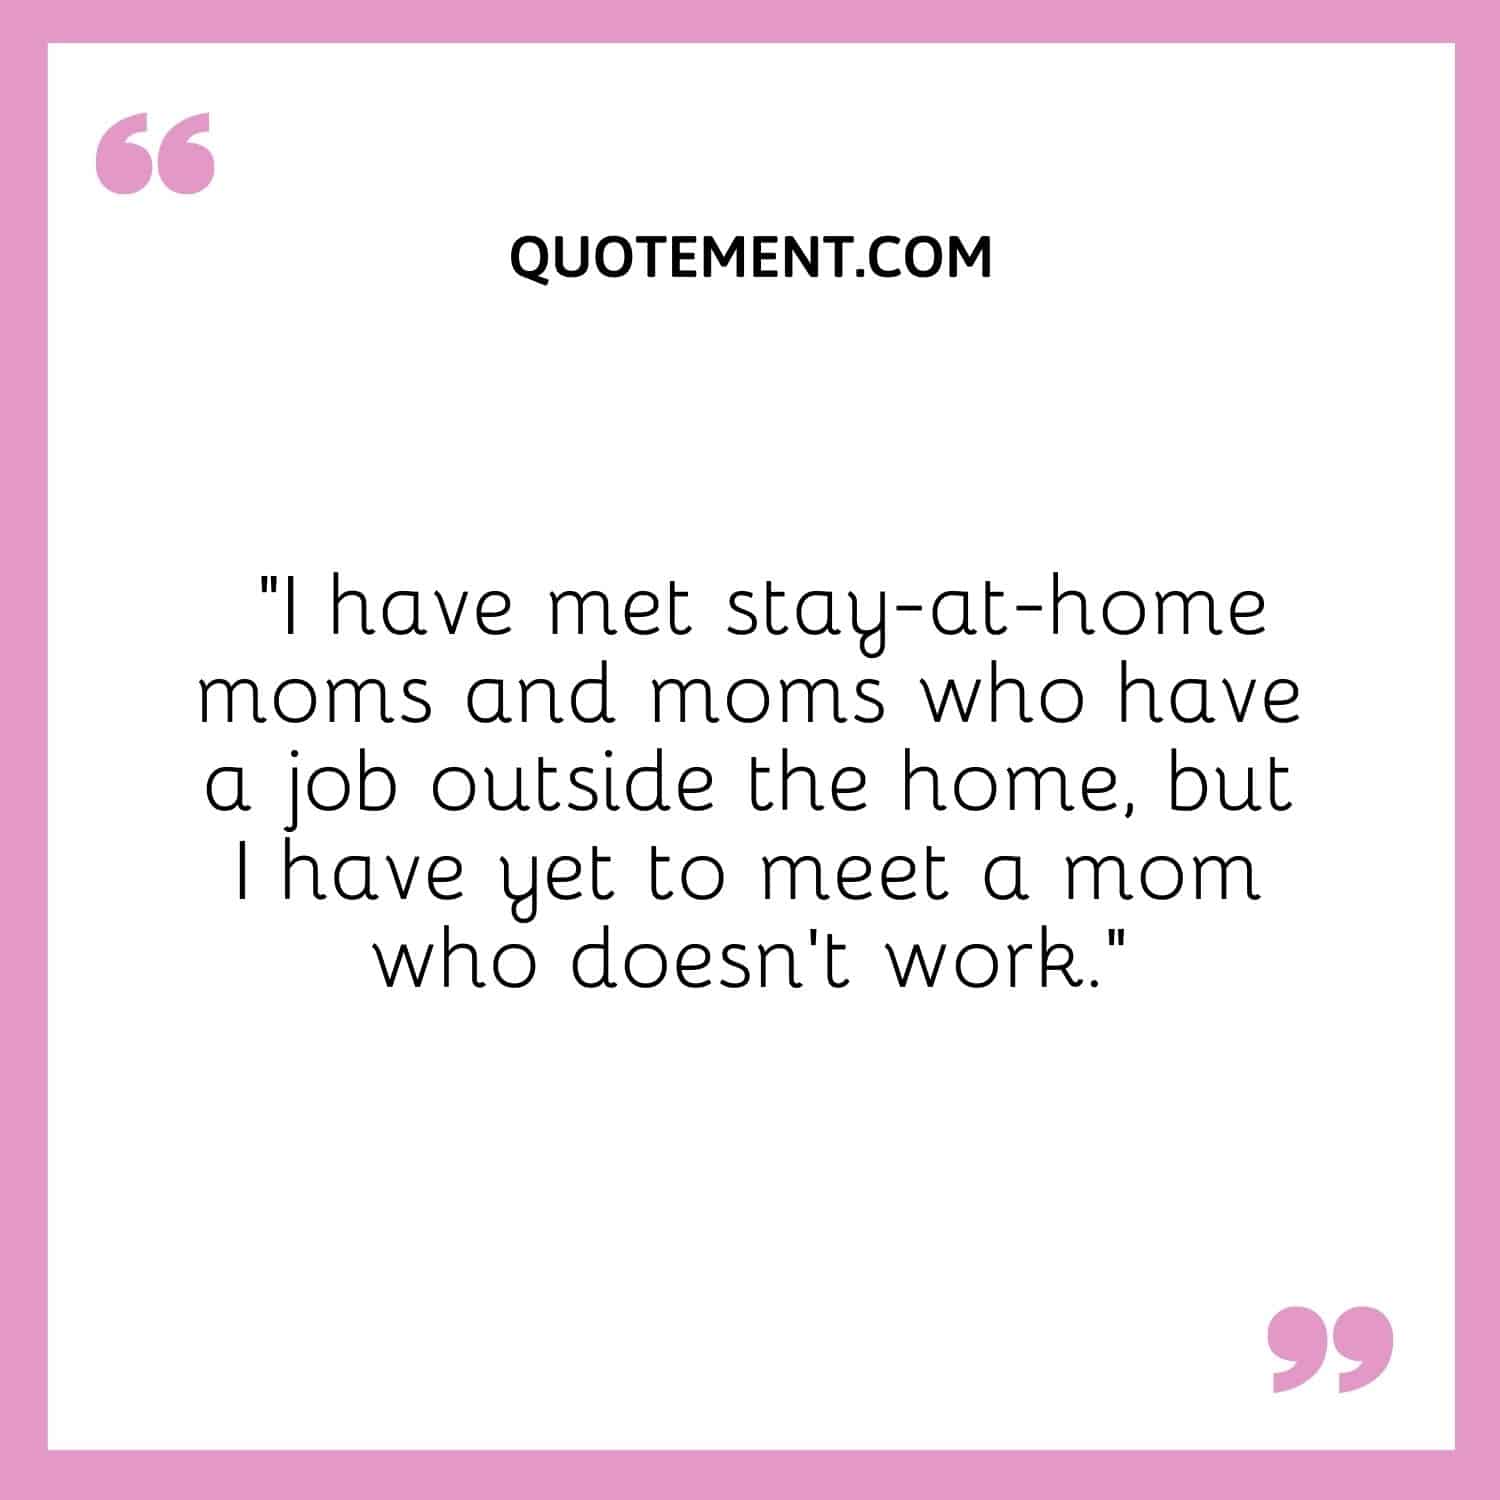 I have met stay-at-home moms and moms who have a job outside the home, but I have yet to meet a mom who doesn’t work